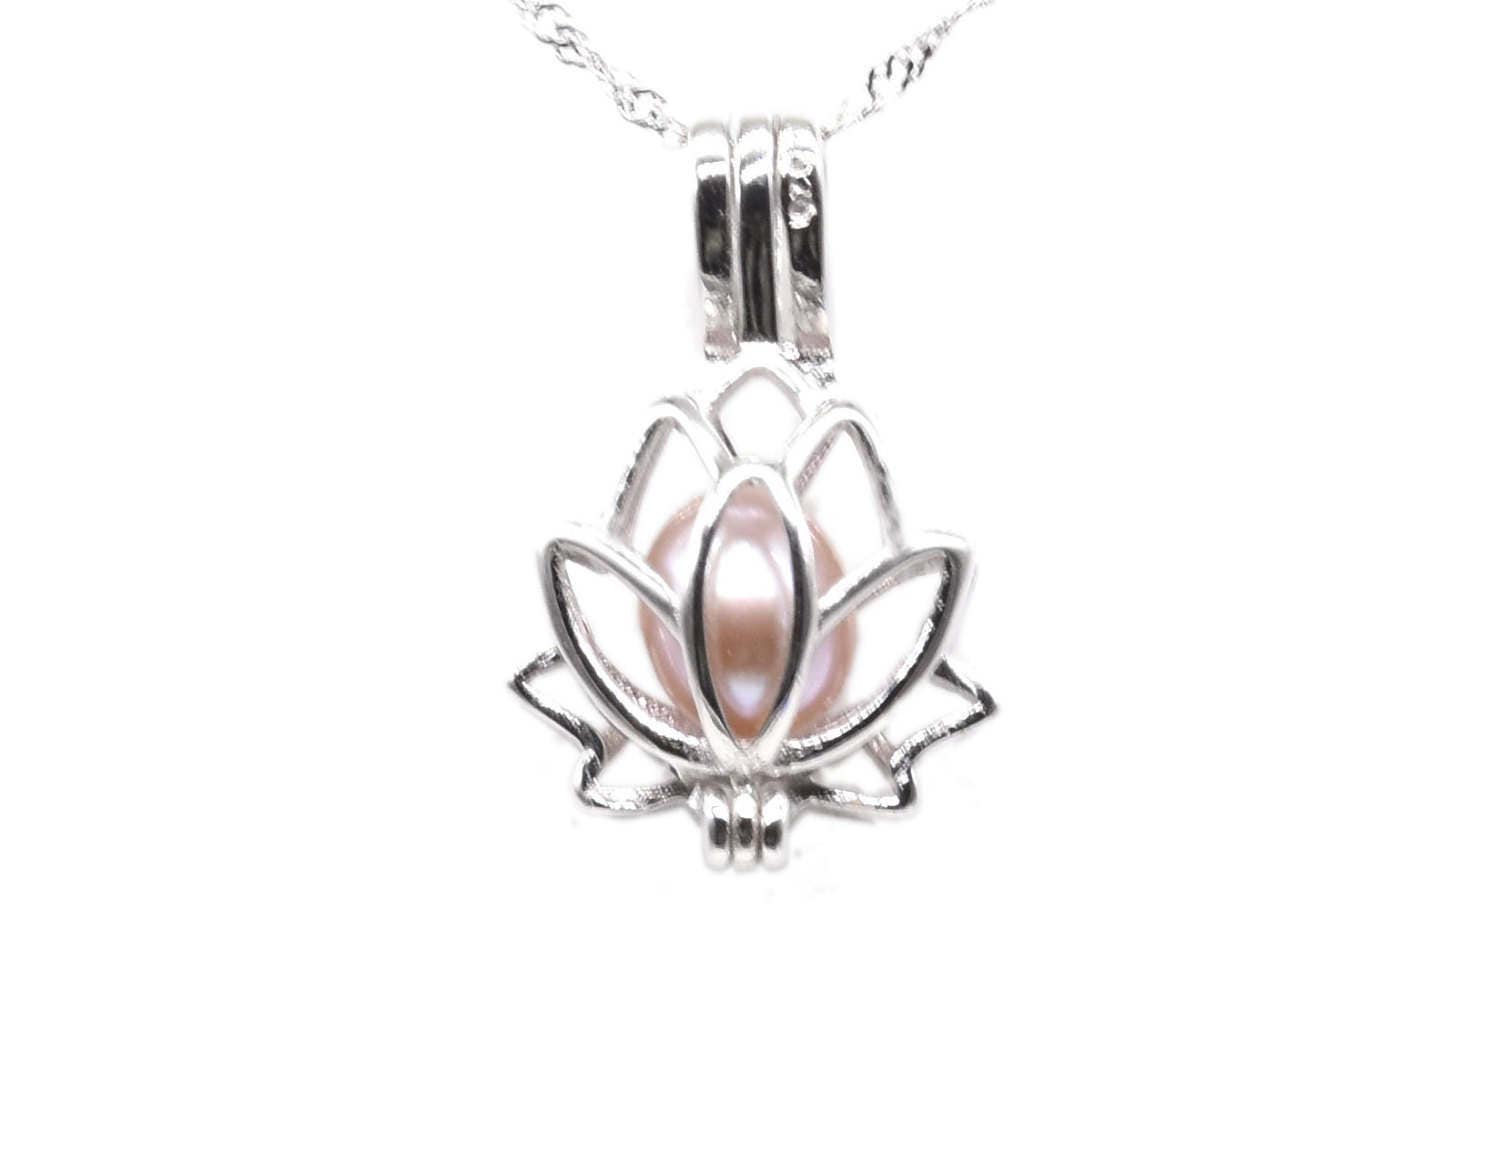 Wholesale Pearl Cage Necklace With Oyster Pendant And Hollow  Turtle/Dolphin/Love Urn Pendant Necklace From Bailu11, $1.03